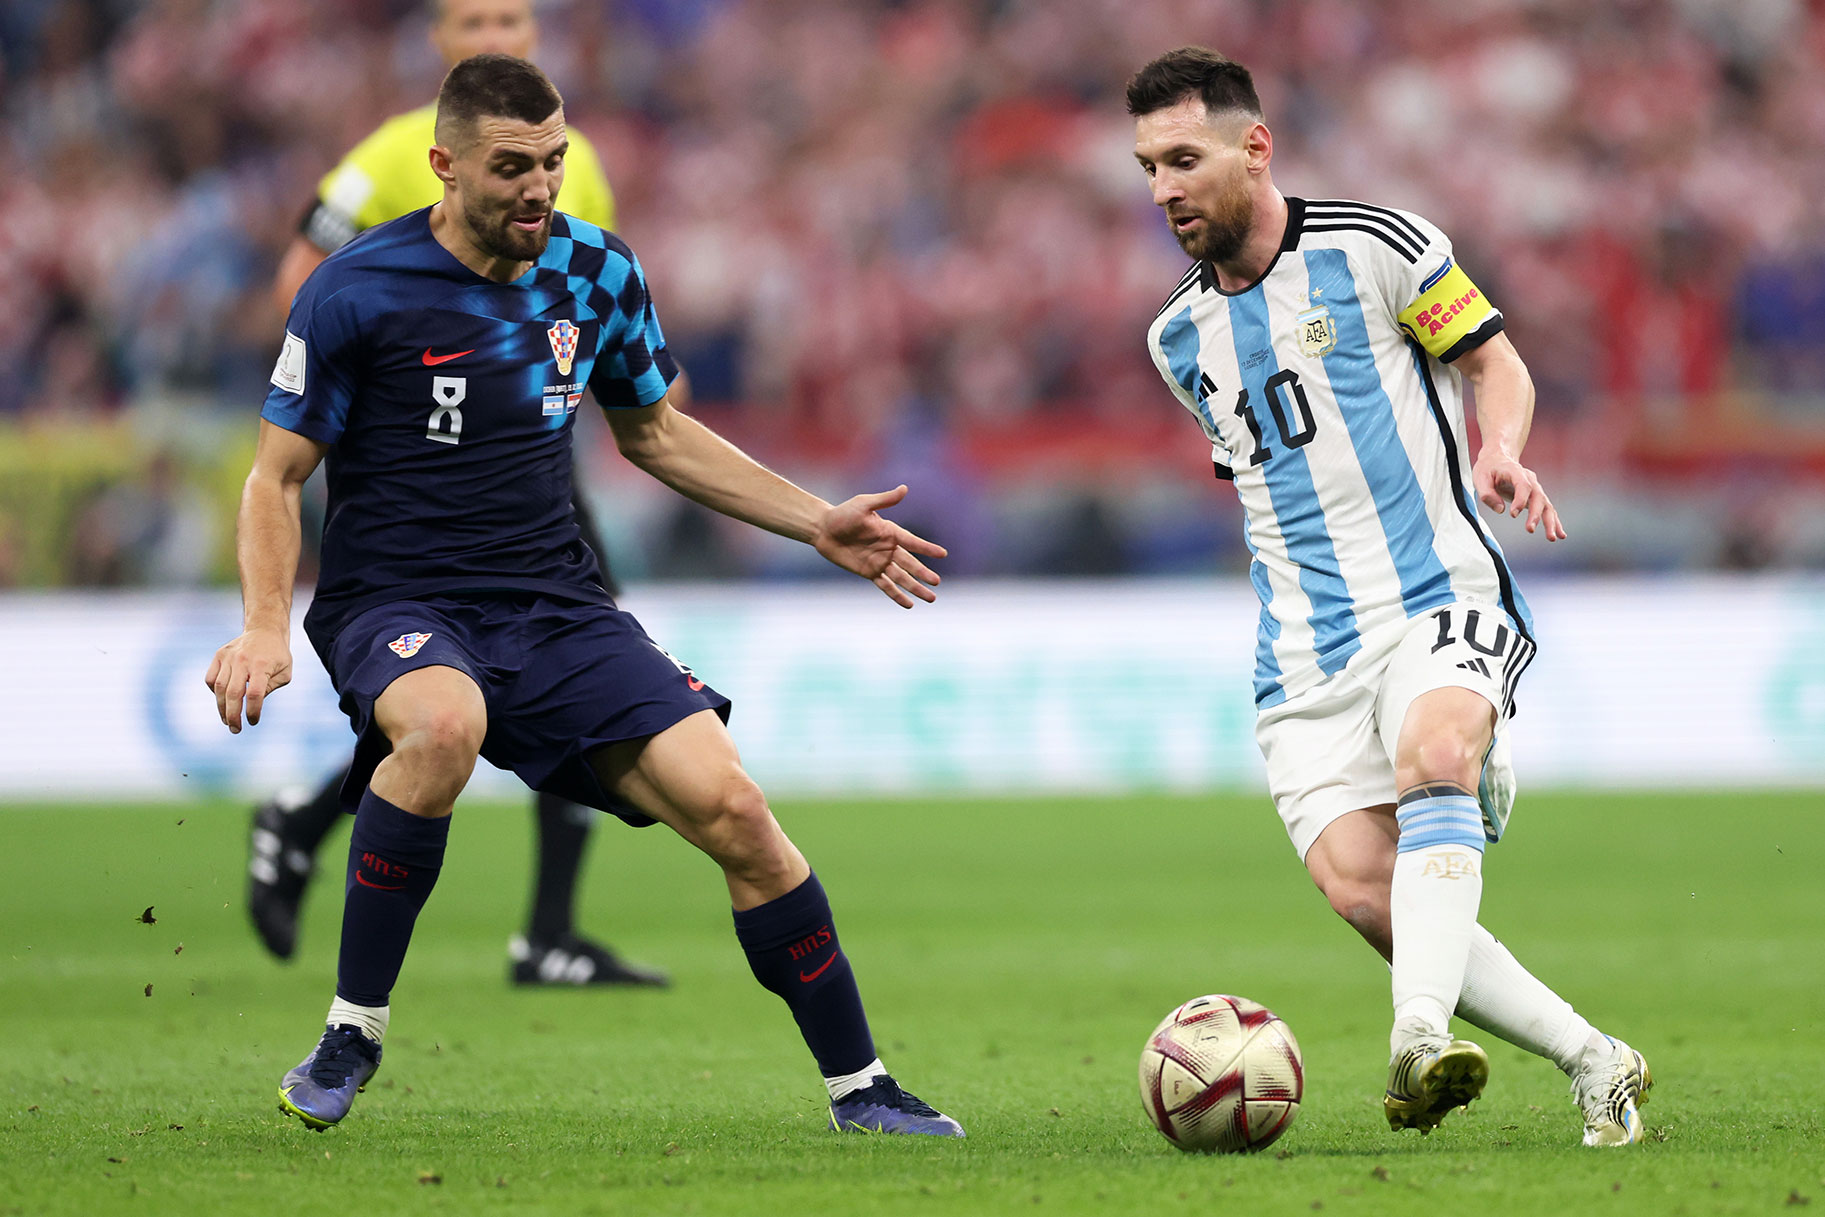 Lionel Messi of Argentina in action during the FIFA World Cup Qatar 2022 semi final match